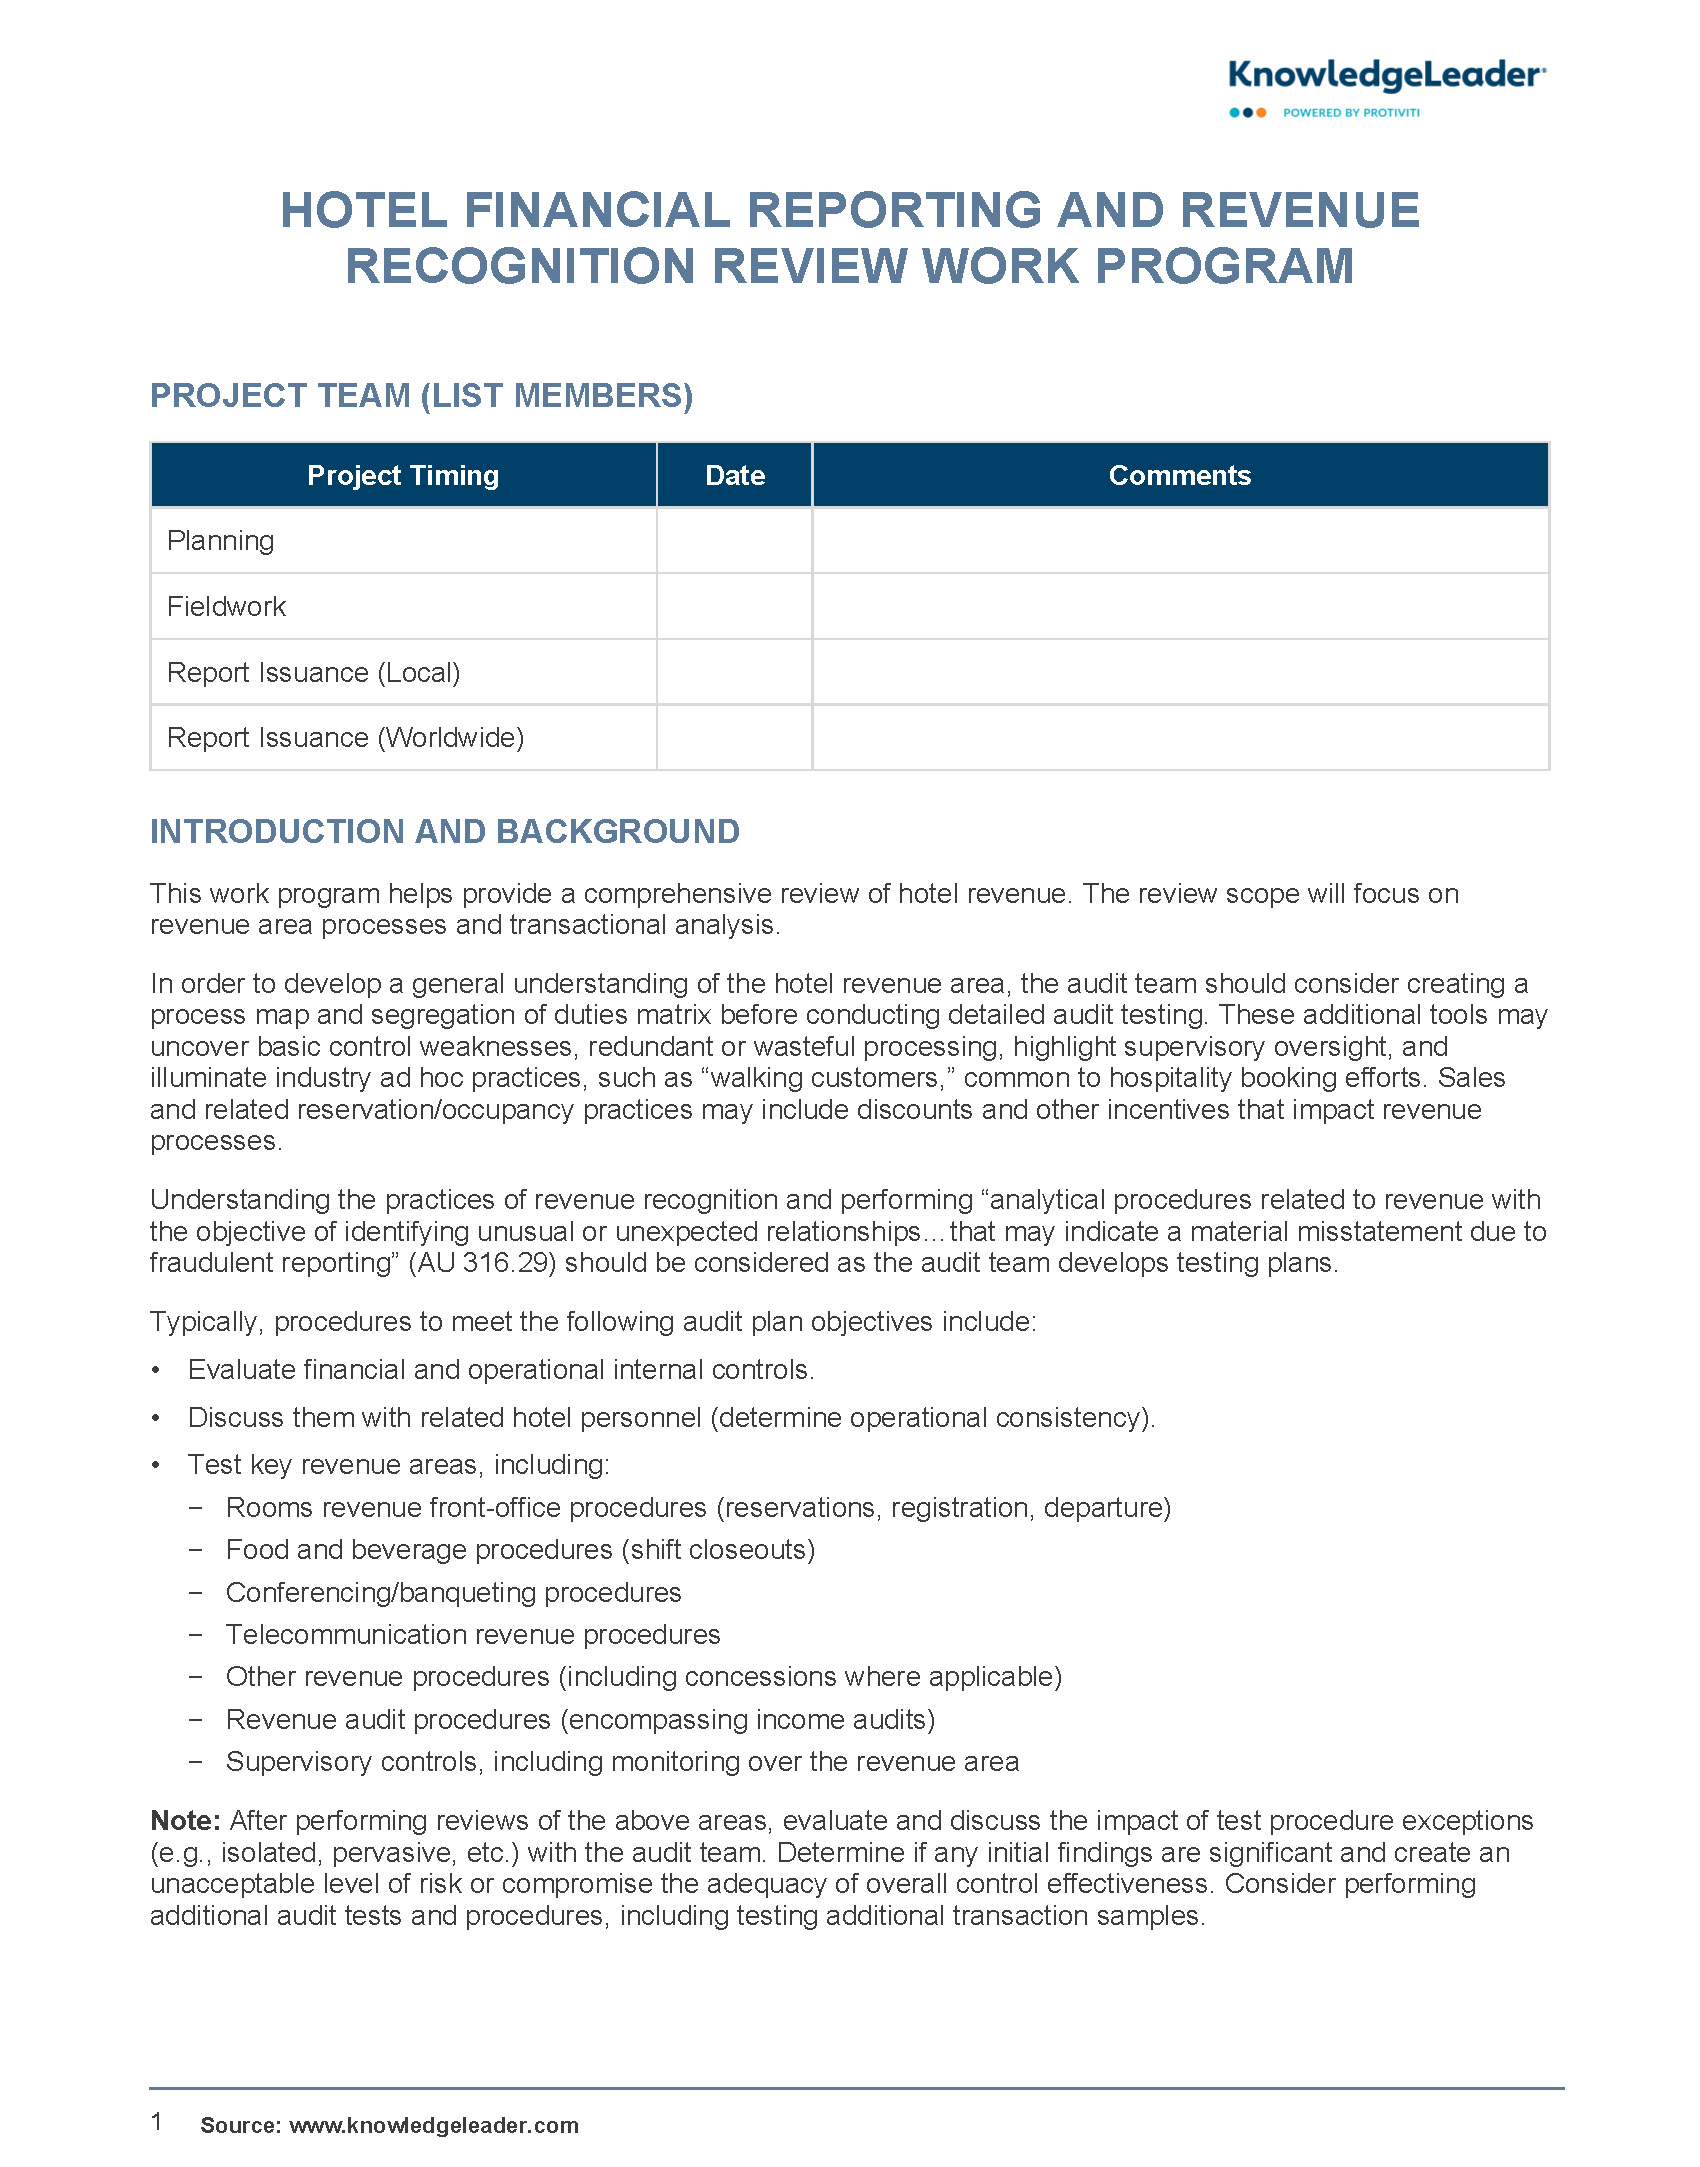 Screenshot of the first page of Hotel Financial Reporting and Revenue Recognition Audit Work Program